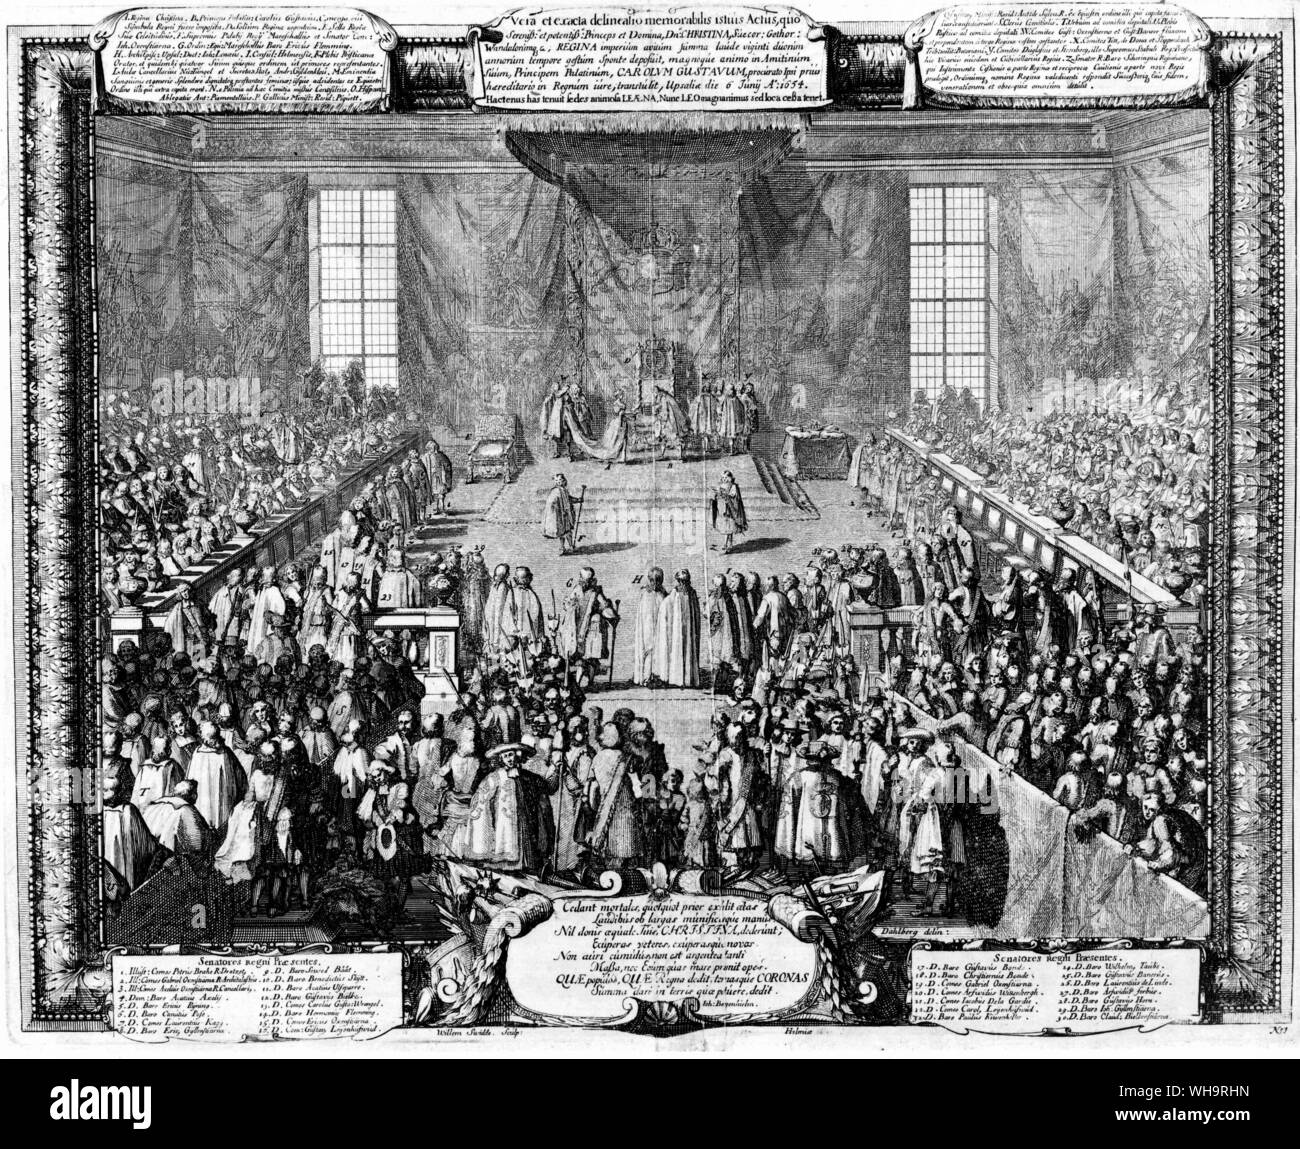 Abidication of Queen Christine at Uppsala, 1654. Stock Photo